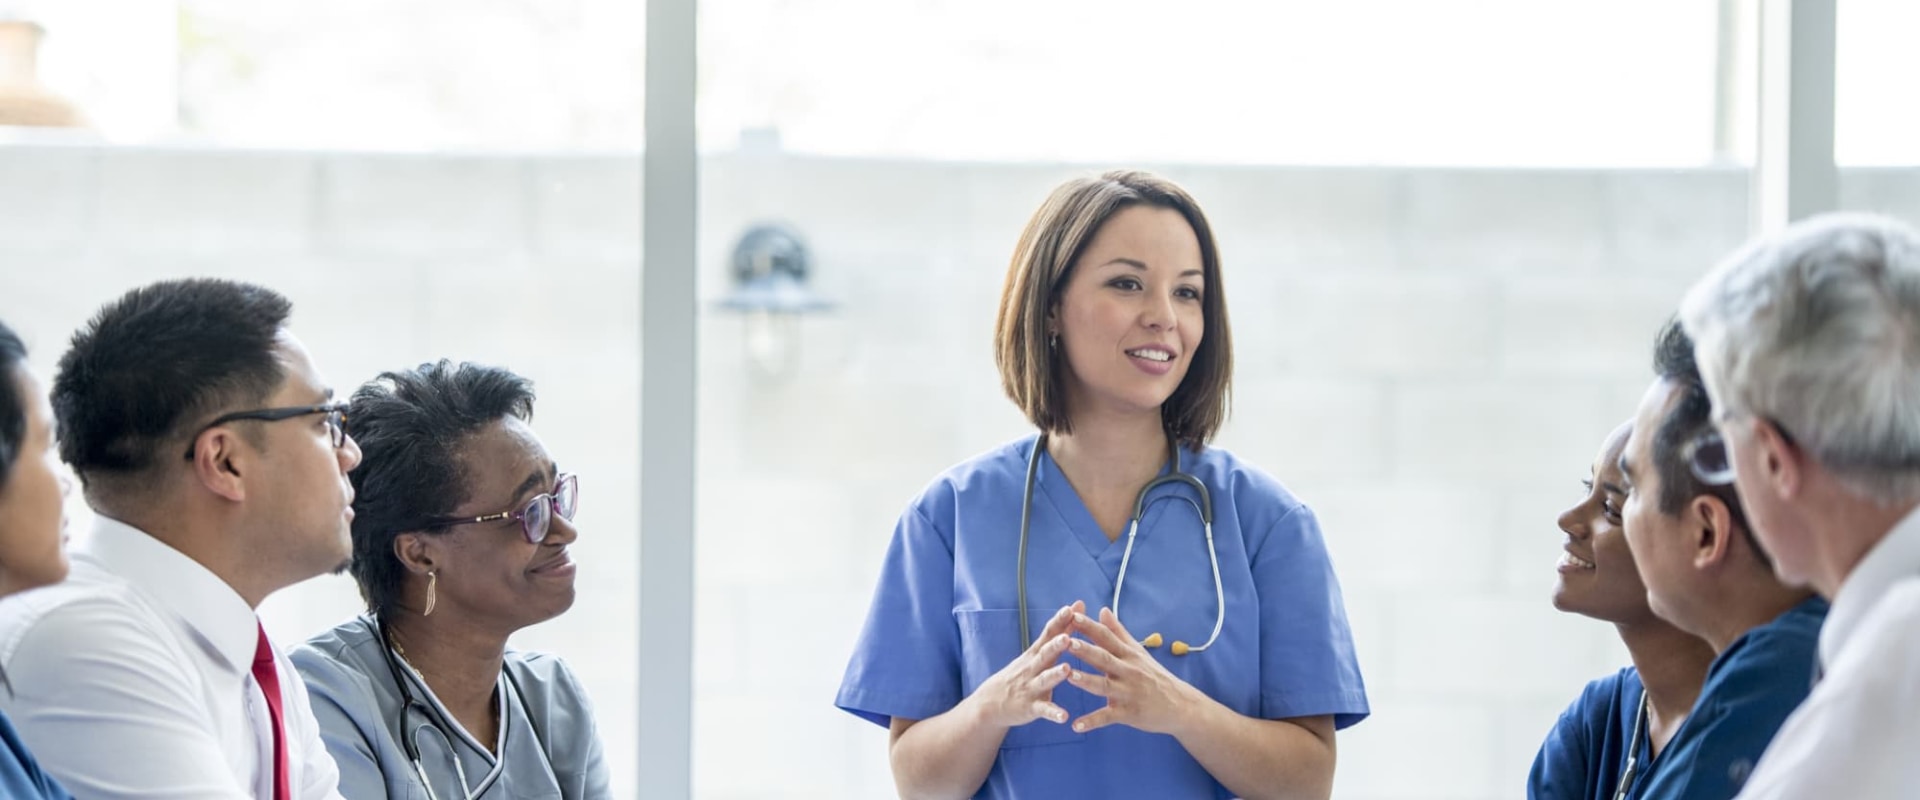 Networking for Professional Growth and Career Development in Healthcare